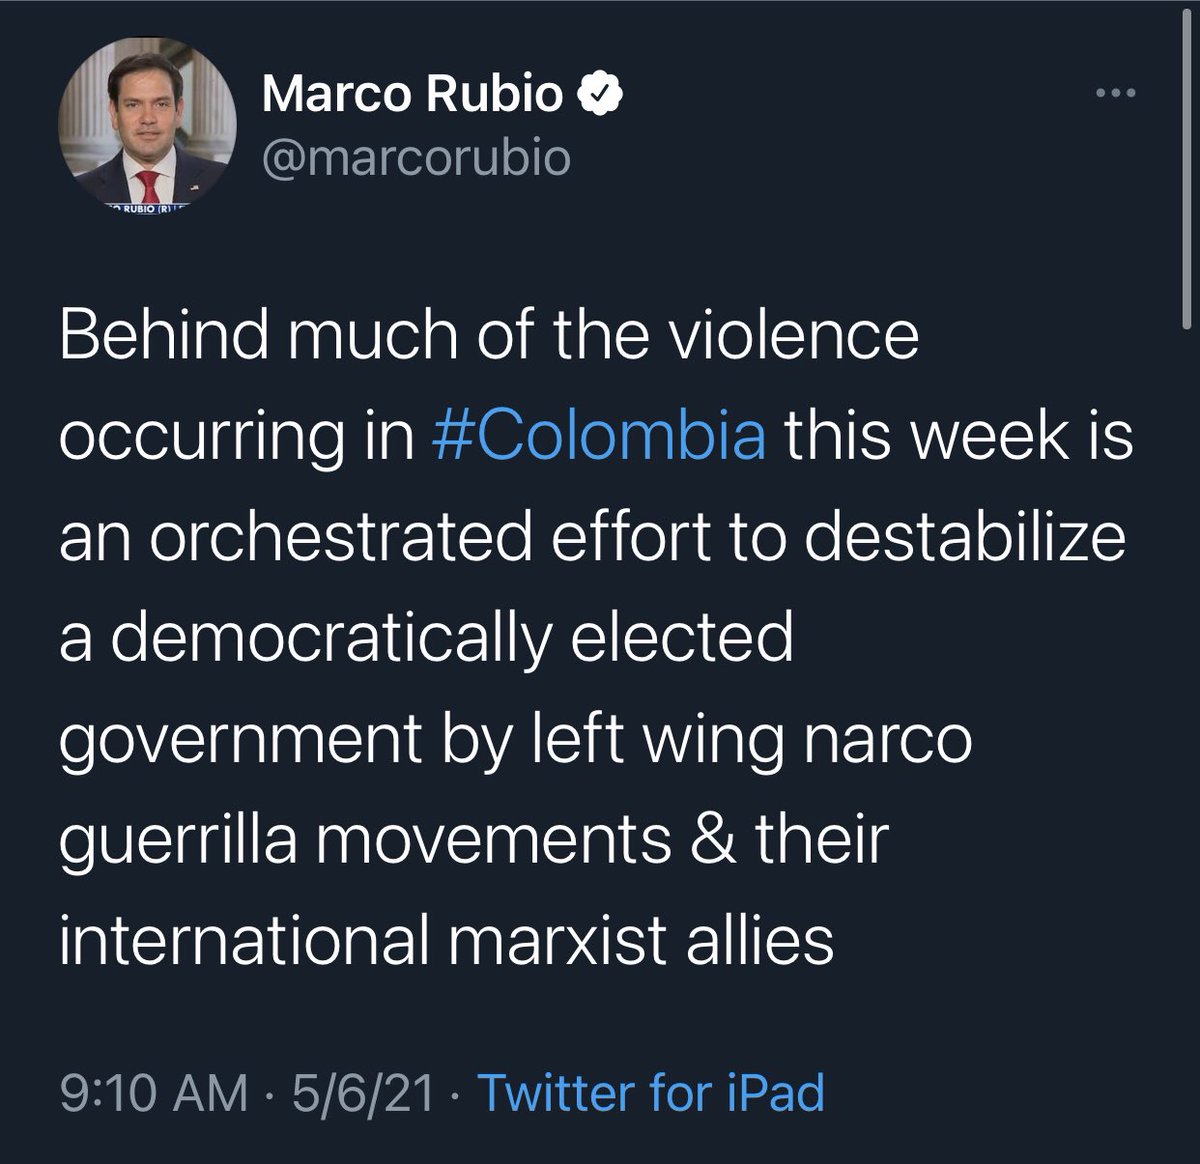 Do you know this is happening?Yesterday I saw a tweet by Marco Rubio where he echoed Duque’s dangerous lies. Calling the protesters guerrilla members. The acute danger of empire. If you abhor police brutality here I need you to abhor police brutality everywhere.